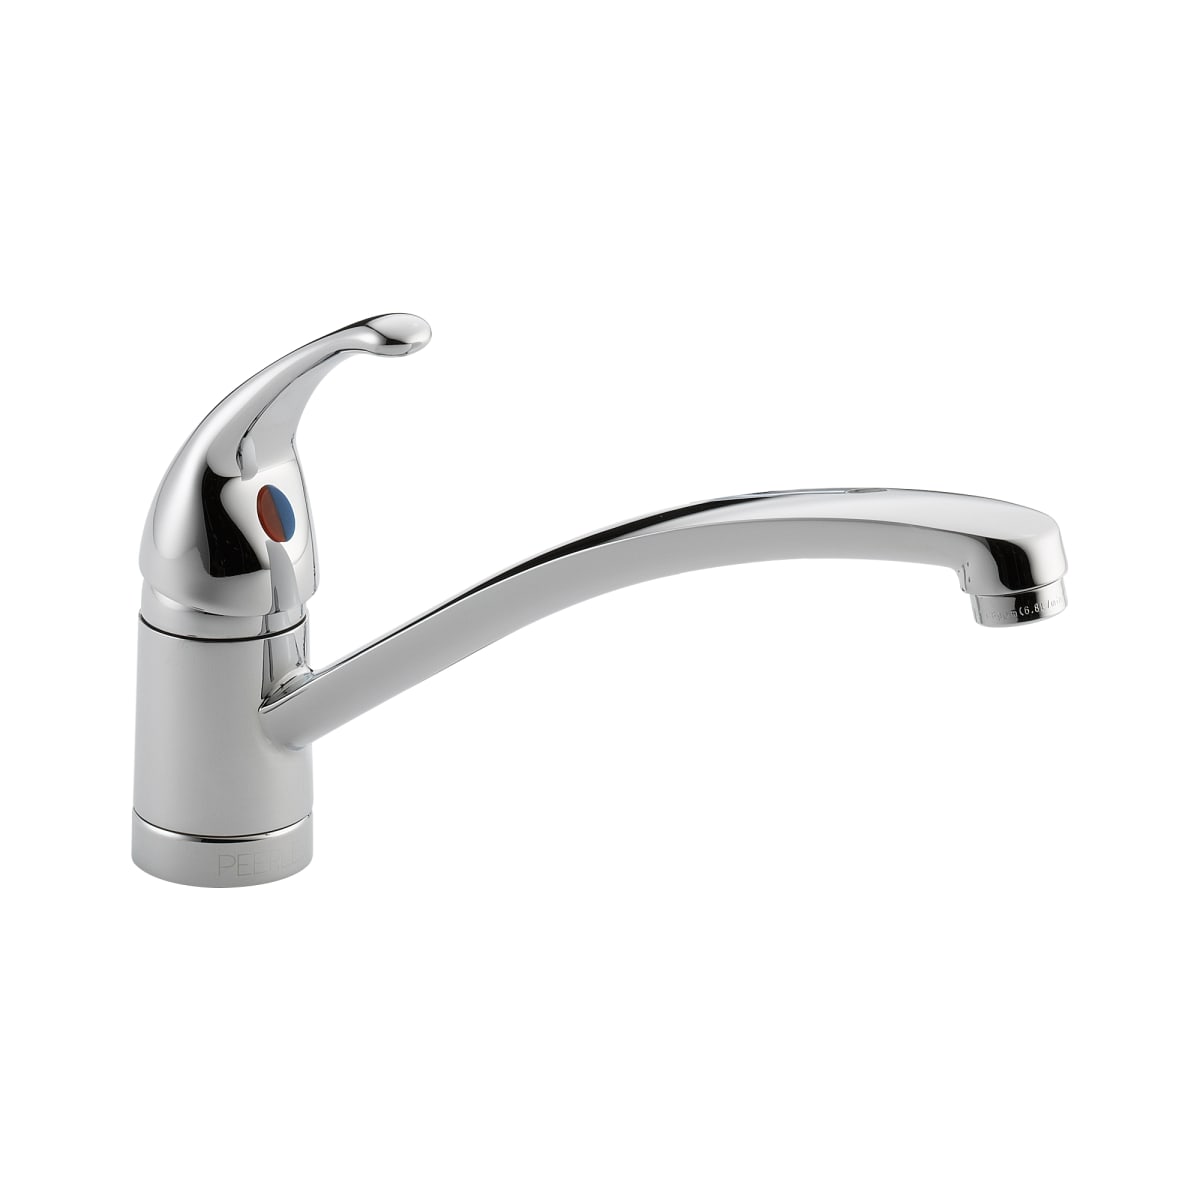 Peerless P188201lf Chrome Choice Kitchen Faucet Faucetdirect Com